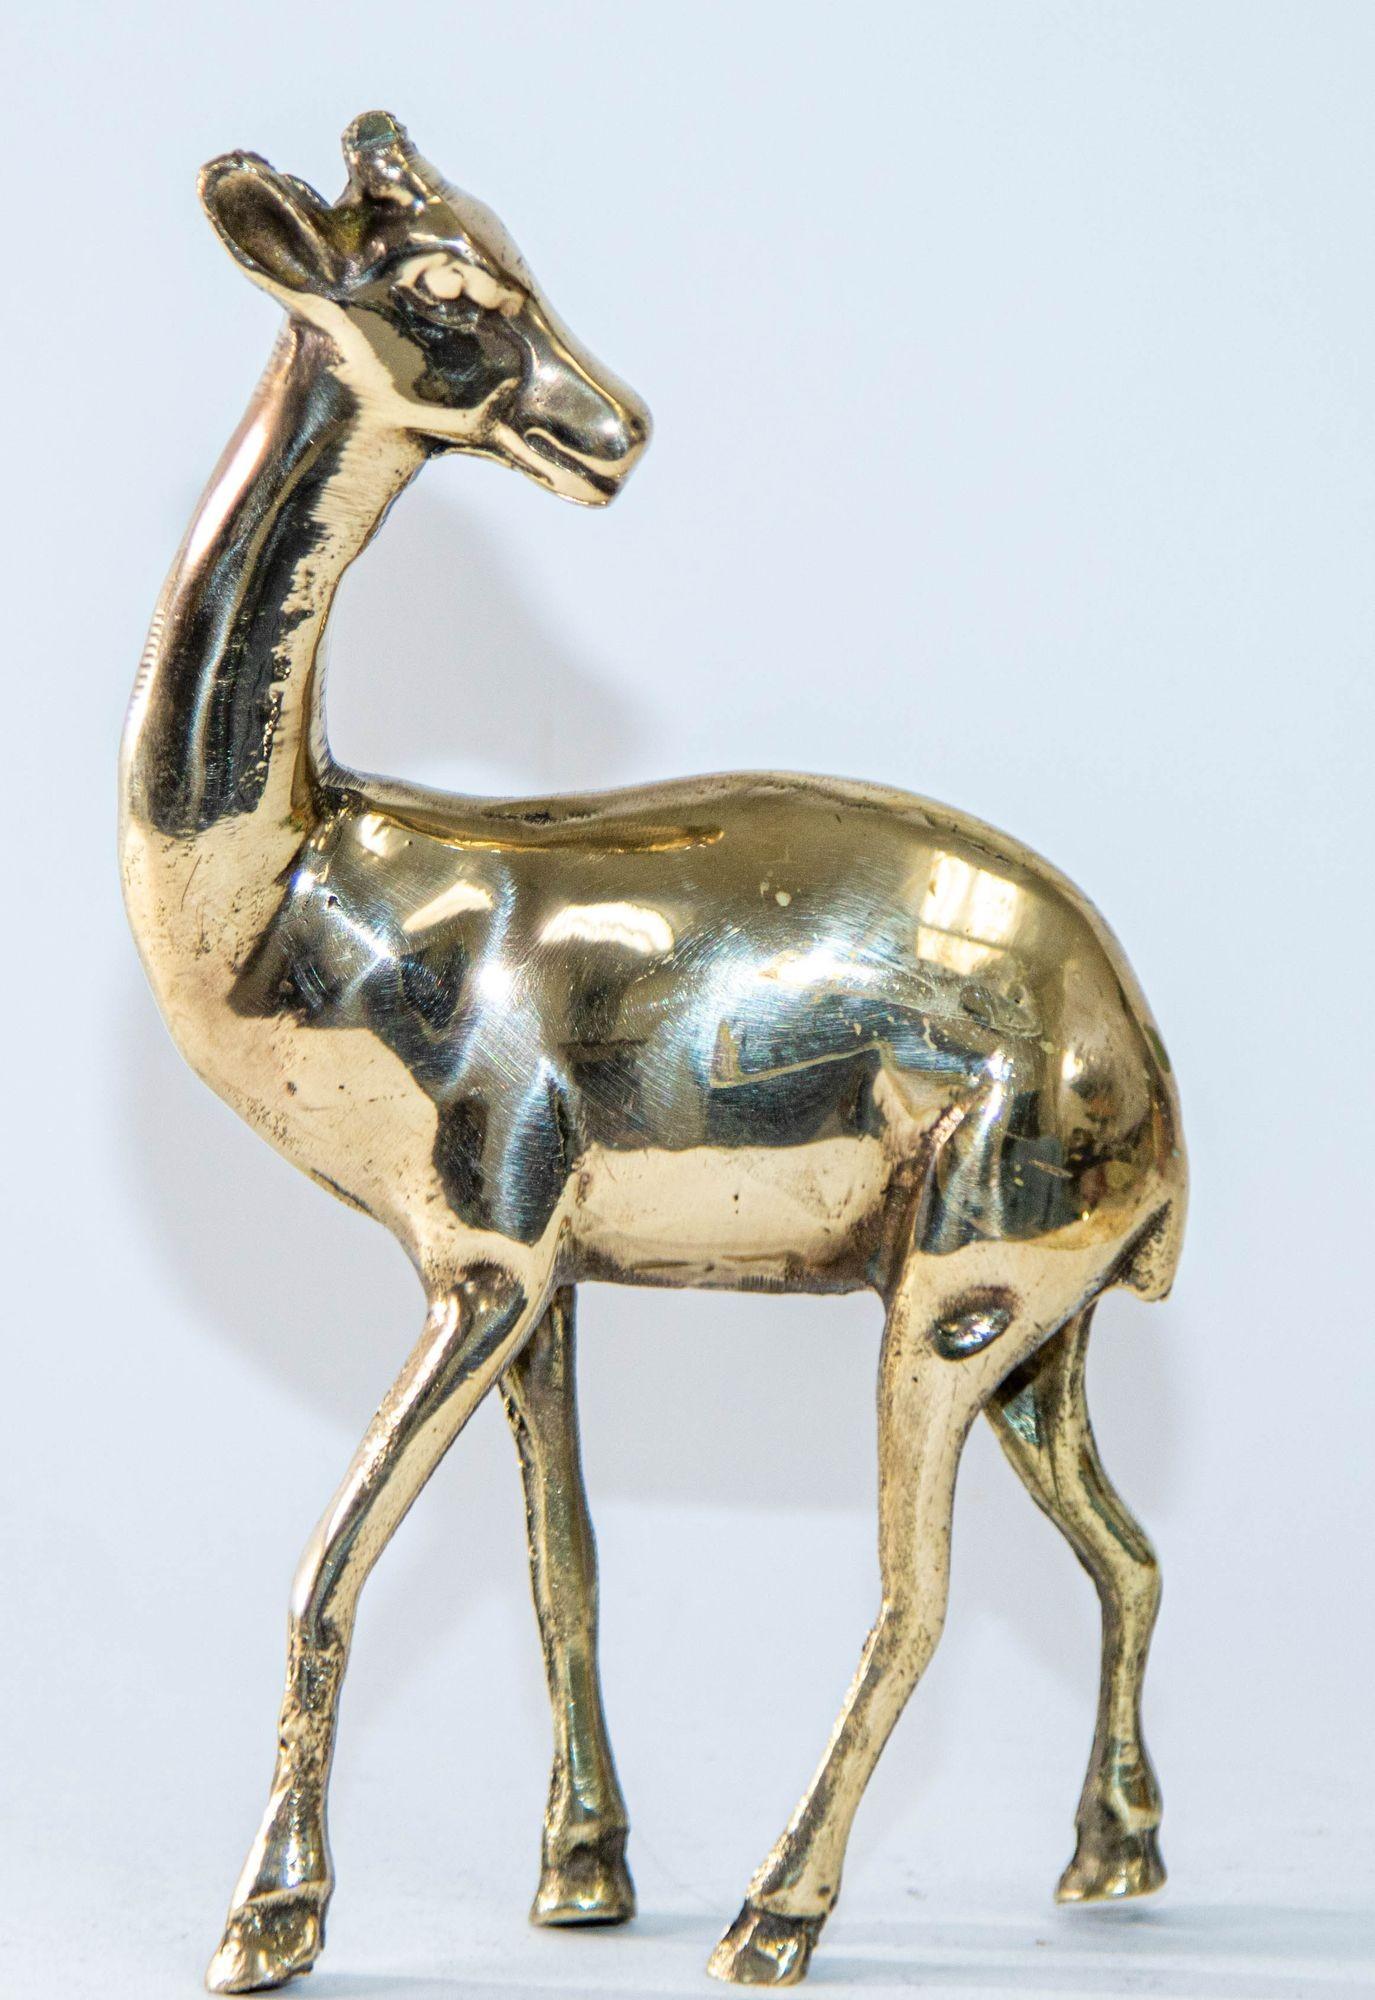 Vintage 1950s solid polished brass gazelle young deer figurine sculpture in the style of Loet Vanderveen.
In Asia Fen Shui and Vastu belives that when placed facing west it will produce an active life to the inactive sluggish and dull running of